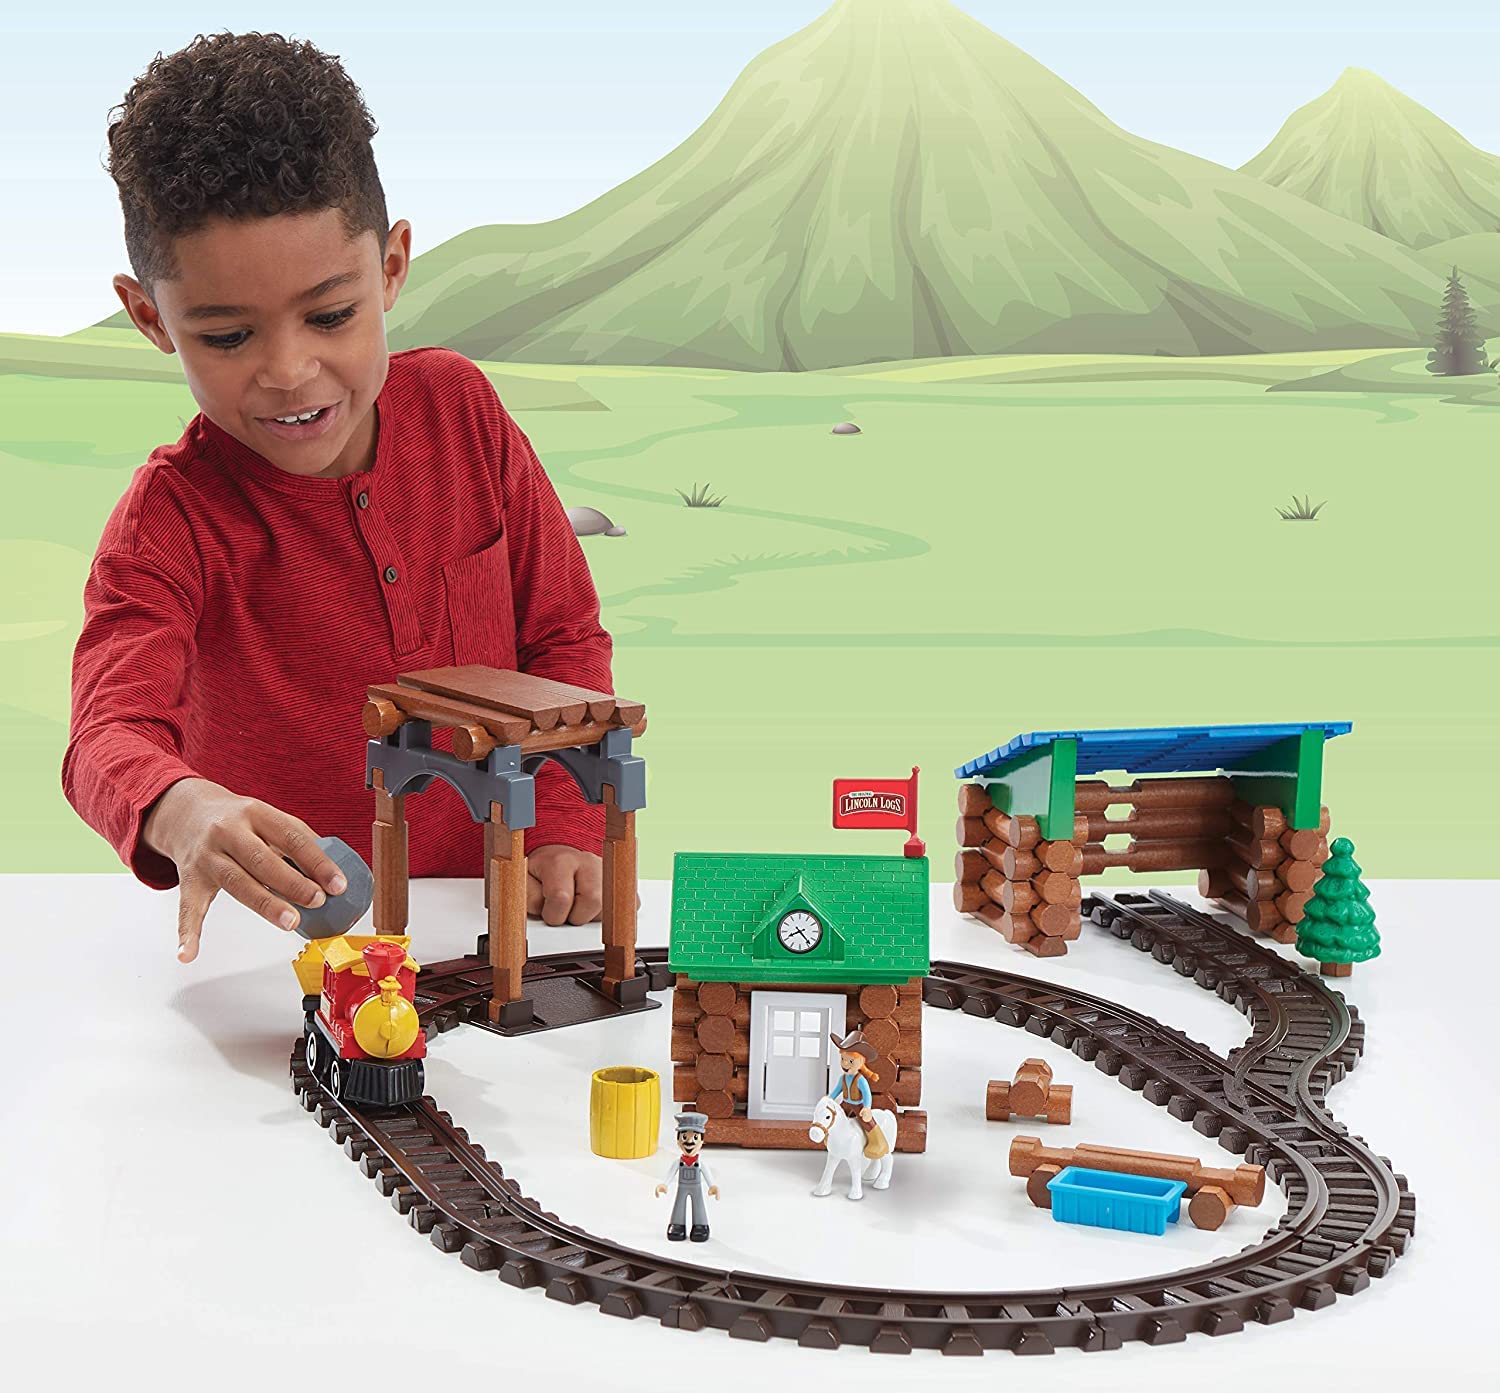 LINCOLN LOGS-Sawmill Express Train - 101 Parts - Real Wood Logs - Buildable Train Track-Ages 3+ - Best Retro Building Gift Set for Boys/Girls-Creative Construction Engineering-Preschool Education Toy